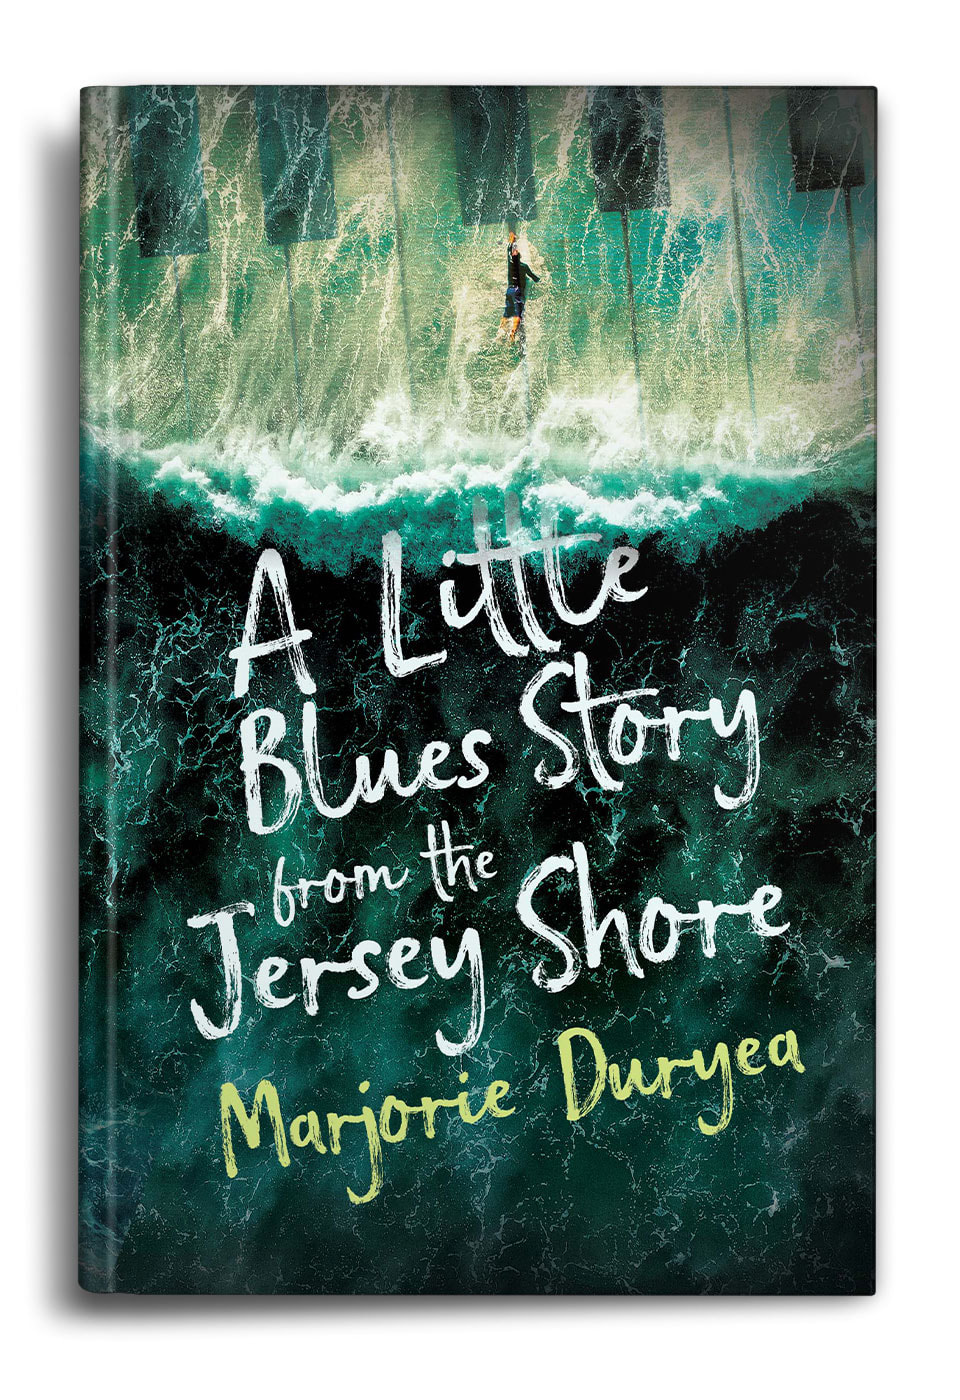 A-Little-Blues-Story-from-the-Jersey-Shore-by-Marjorie-Duryea